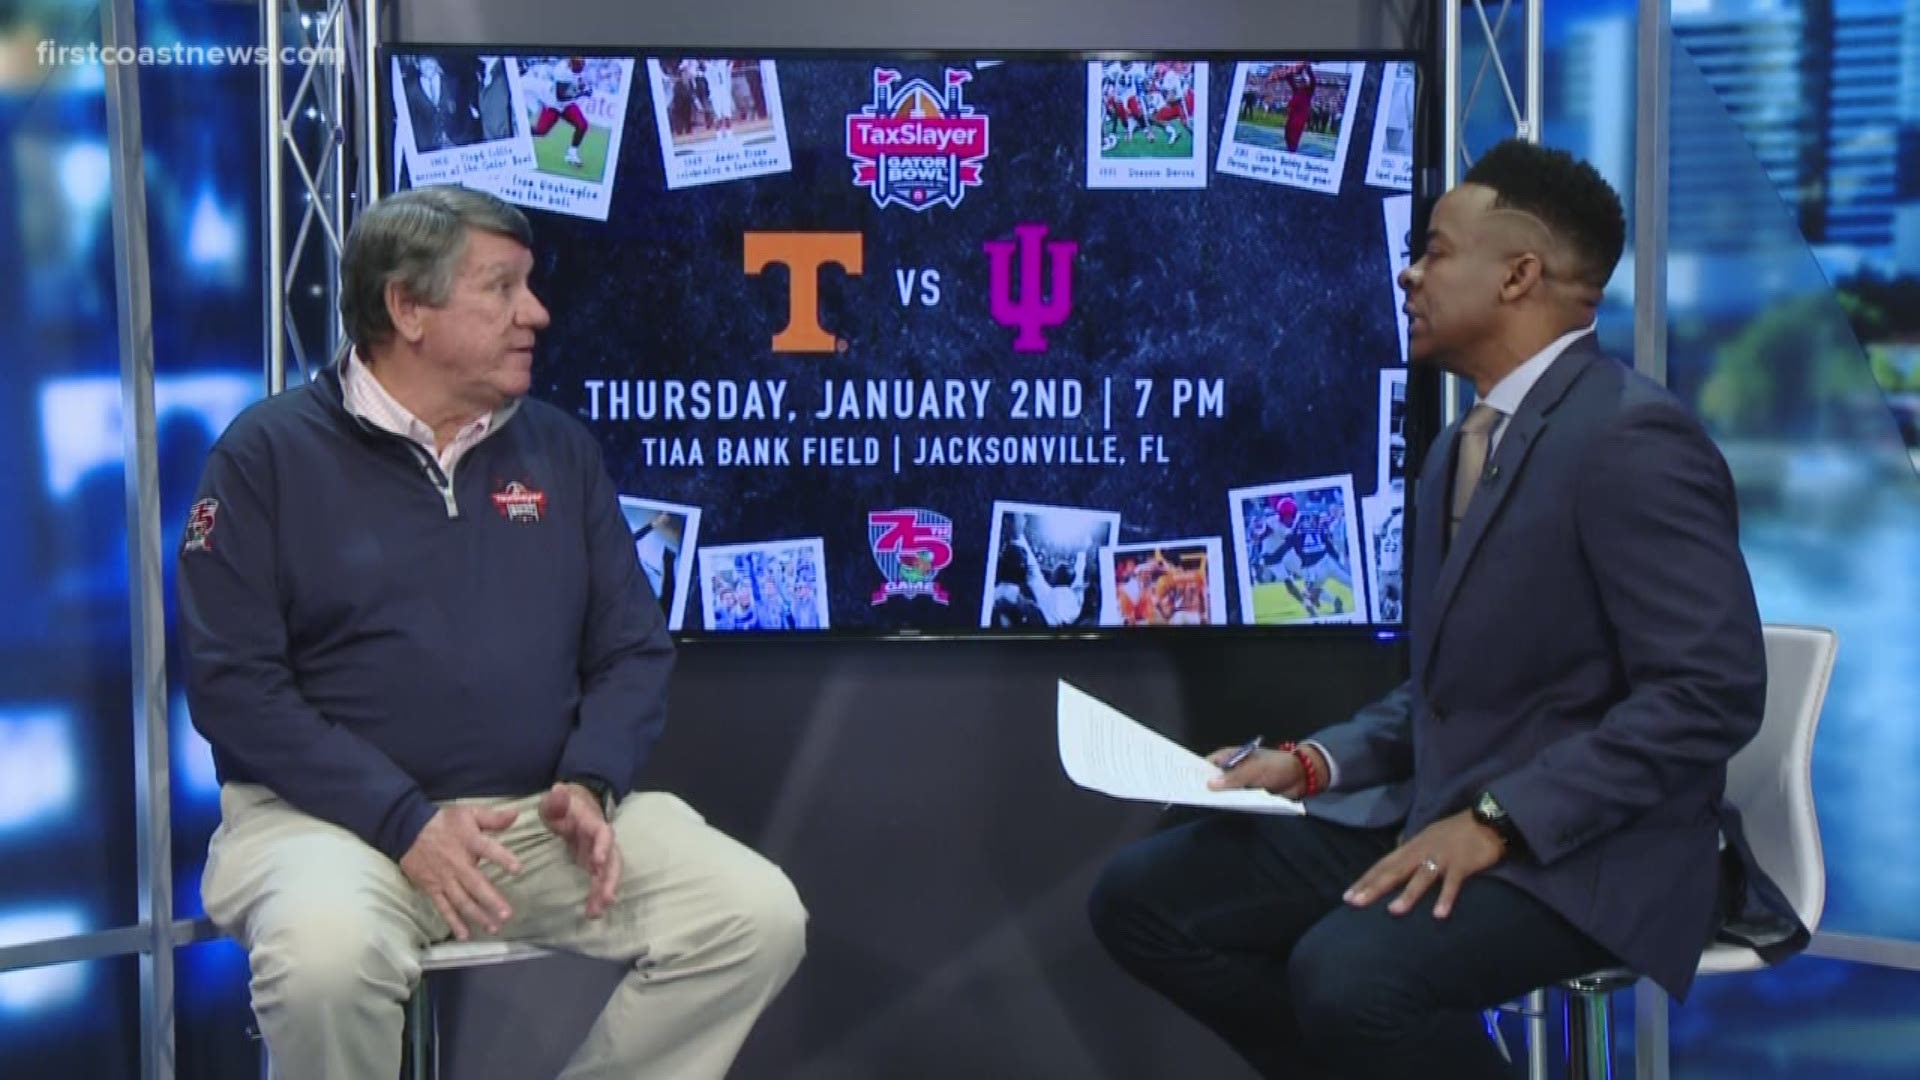 Gator Bowl President and CEO Rick Catlett joins Sports Director Chris Porter to discuss the 2020 TaxSlayer Gator Bowl match-up.